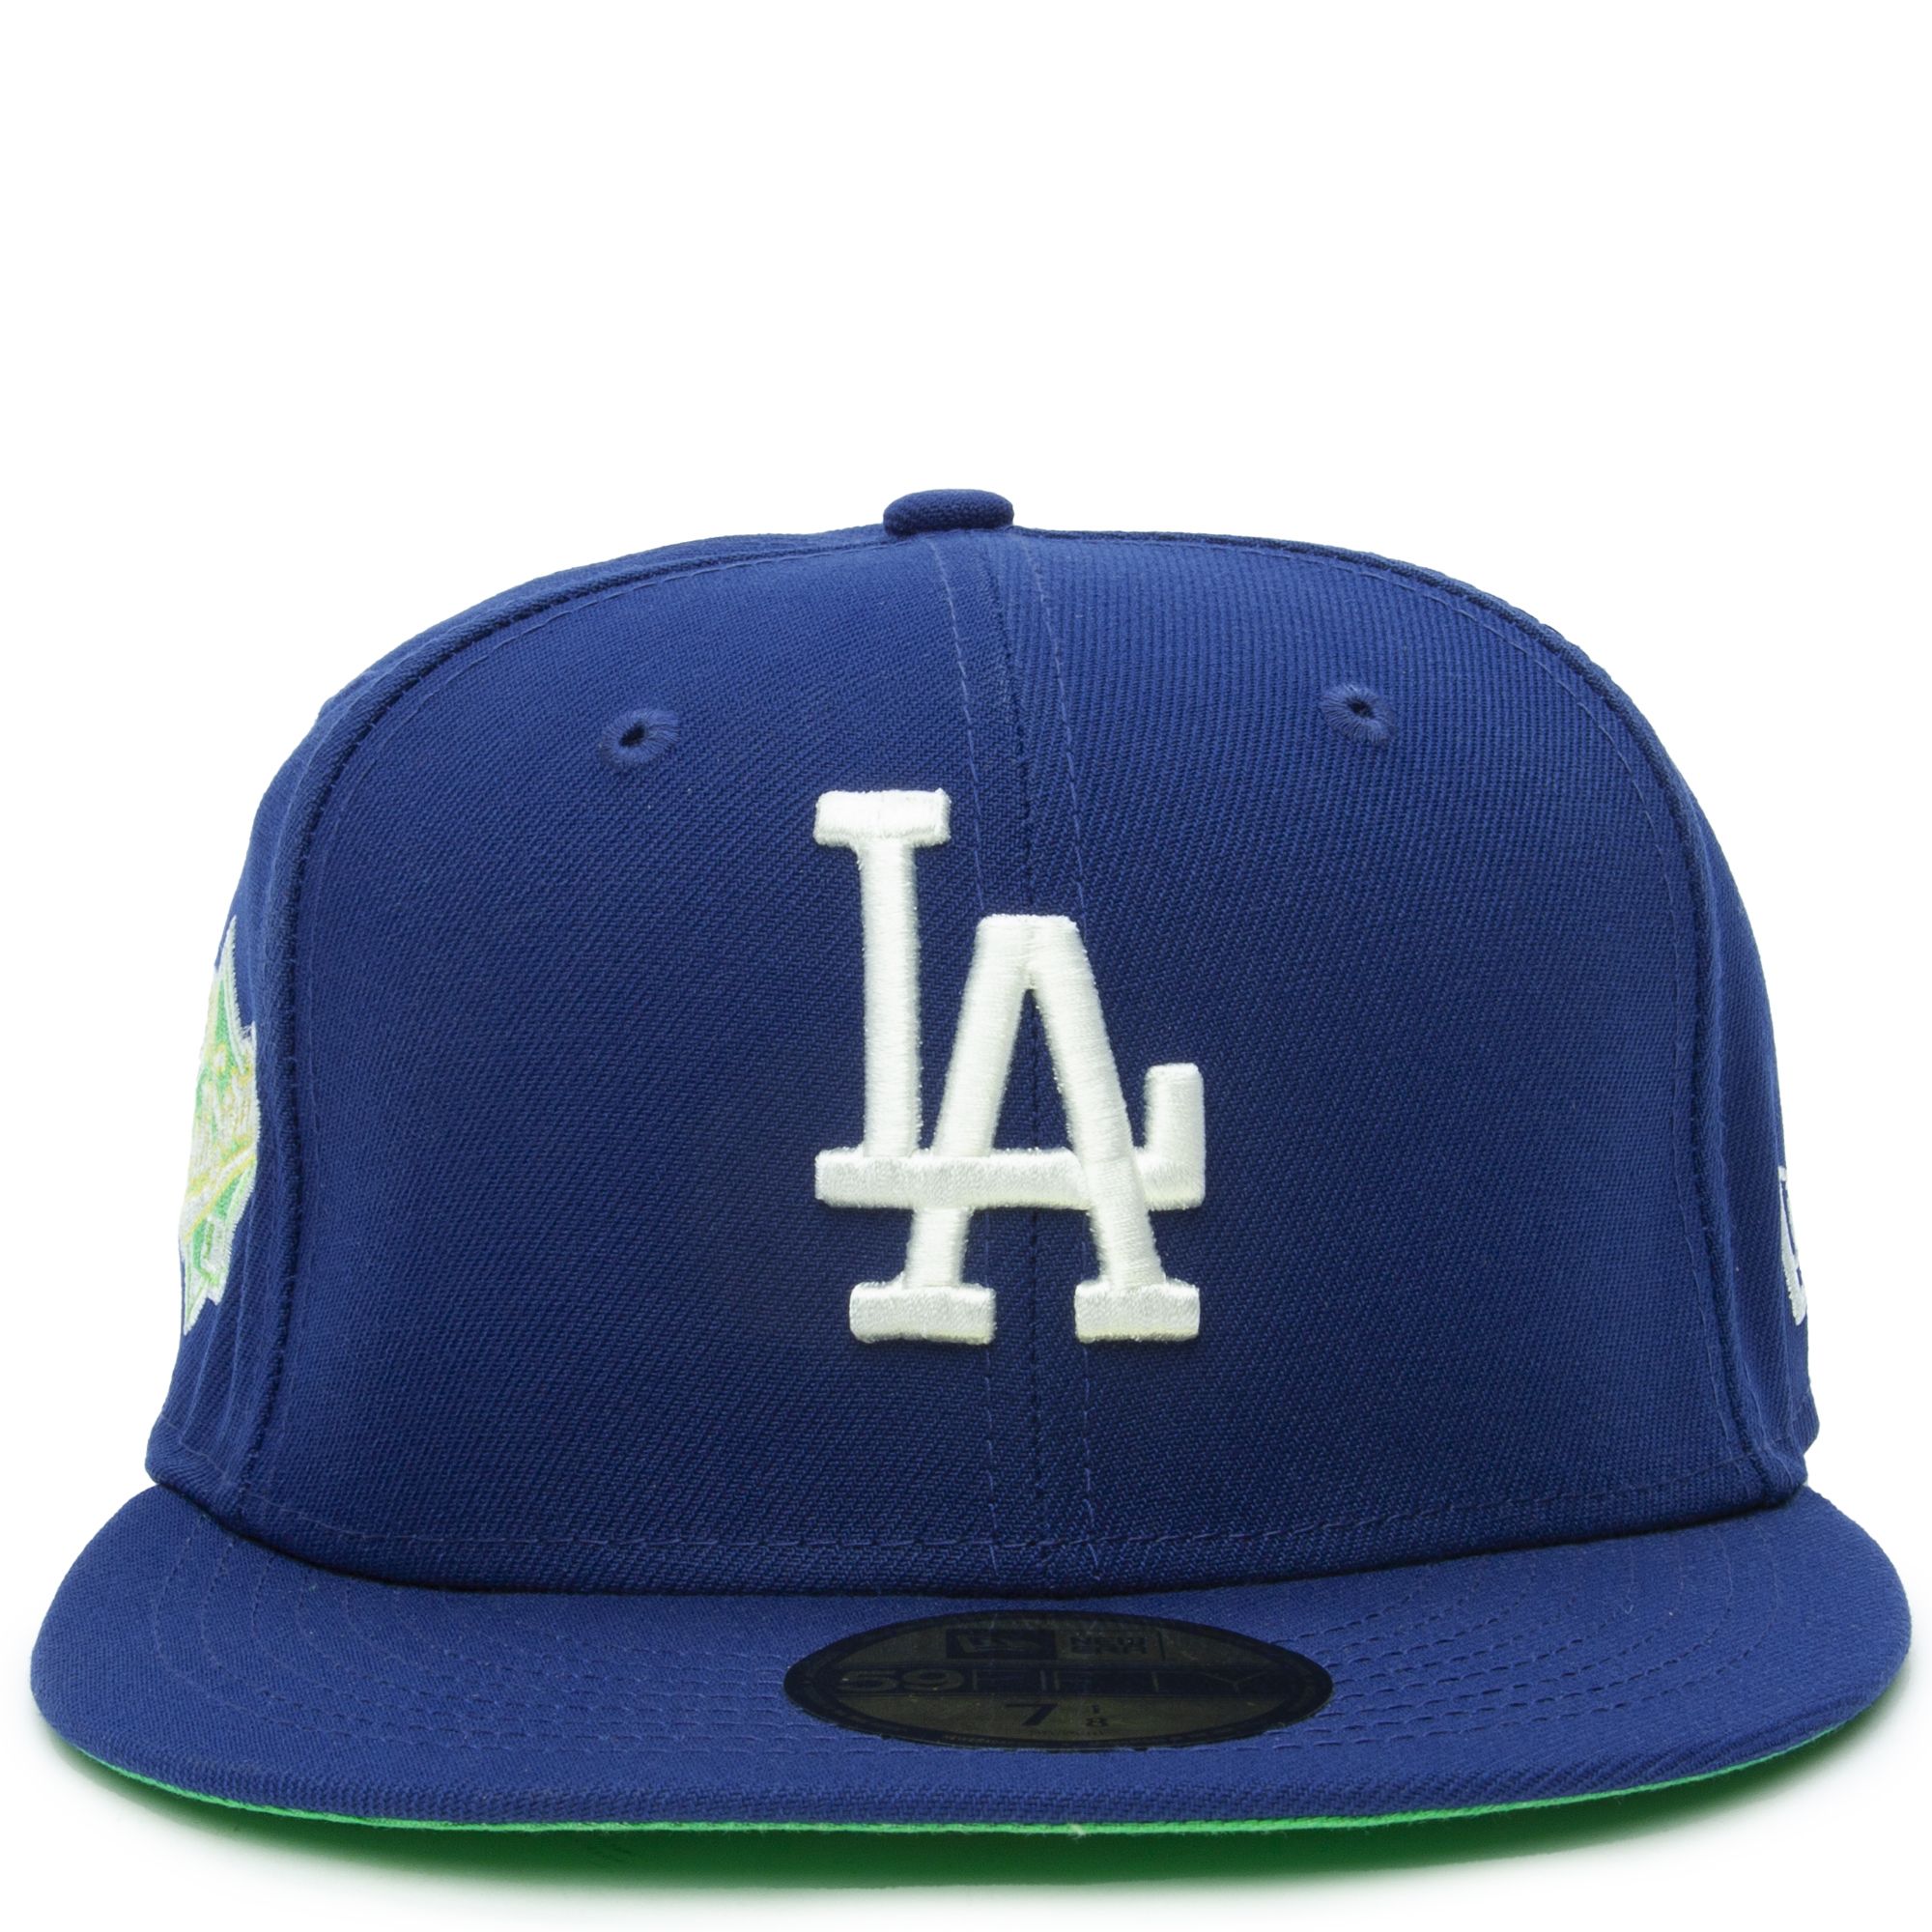 NEW ERA CAPS Los Angeles Dodgers Citrus Pop 59FIFTY Fitted Hat 60288265 ...